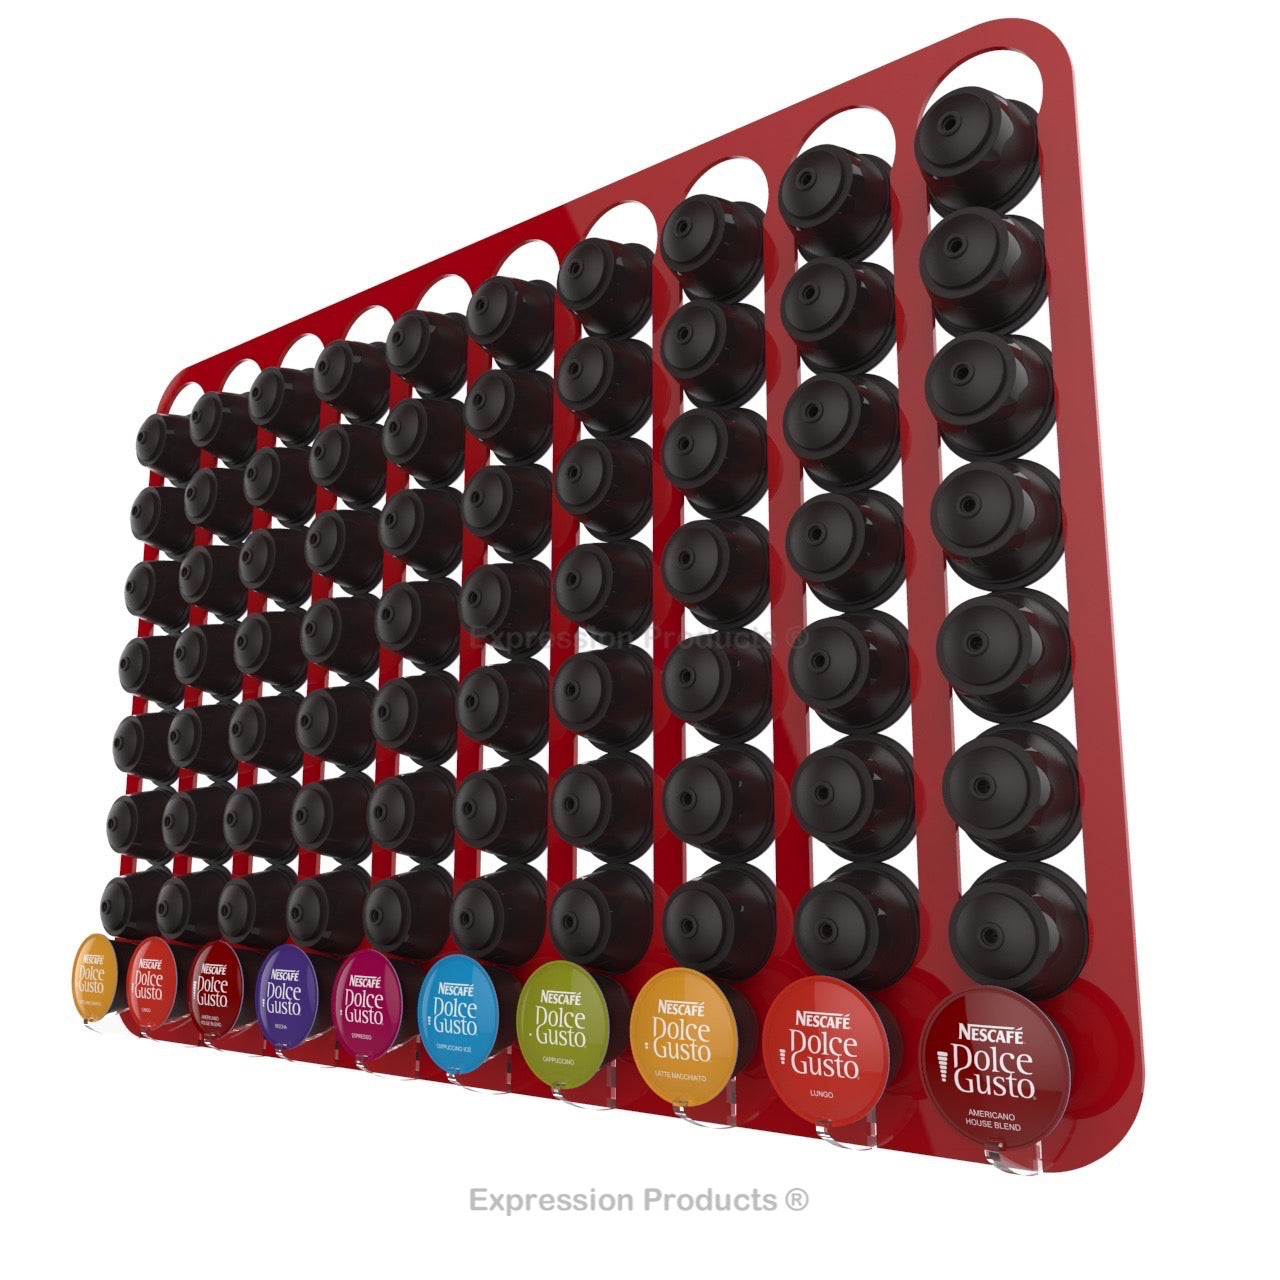 Dolce Gusto Coffee Pod Holder, Wall Mounted.  Shown in Red Holding 80 Pods